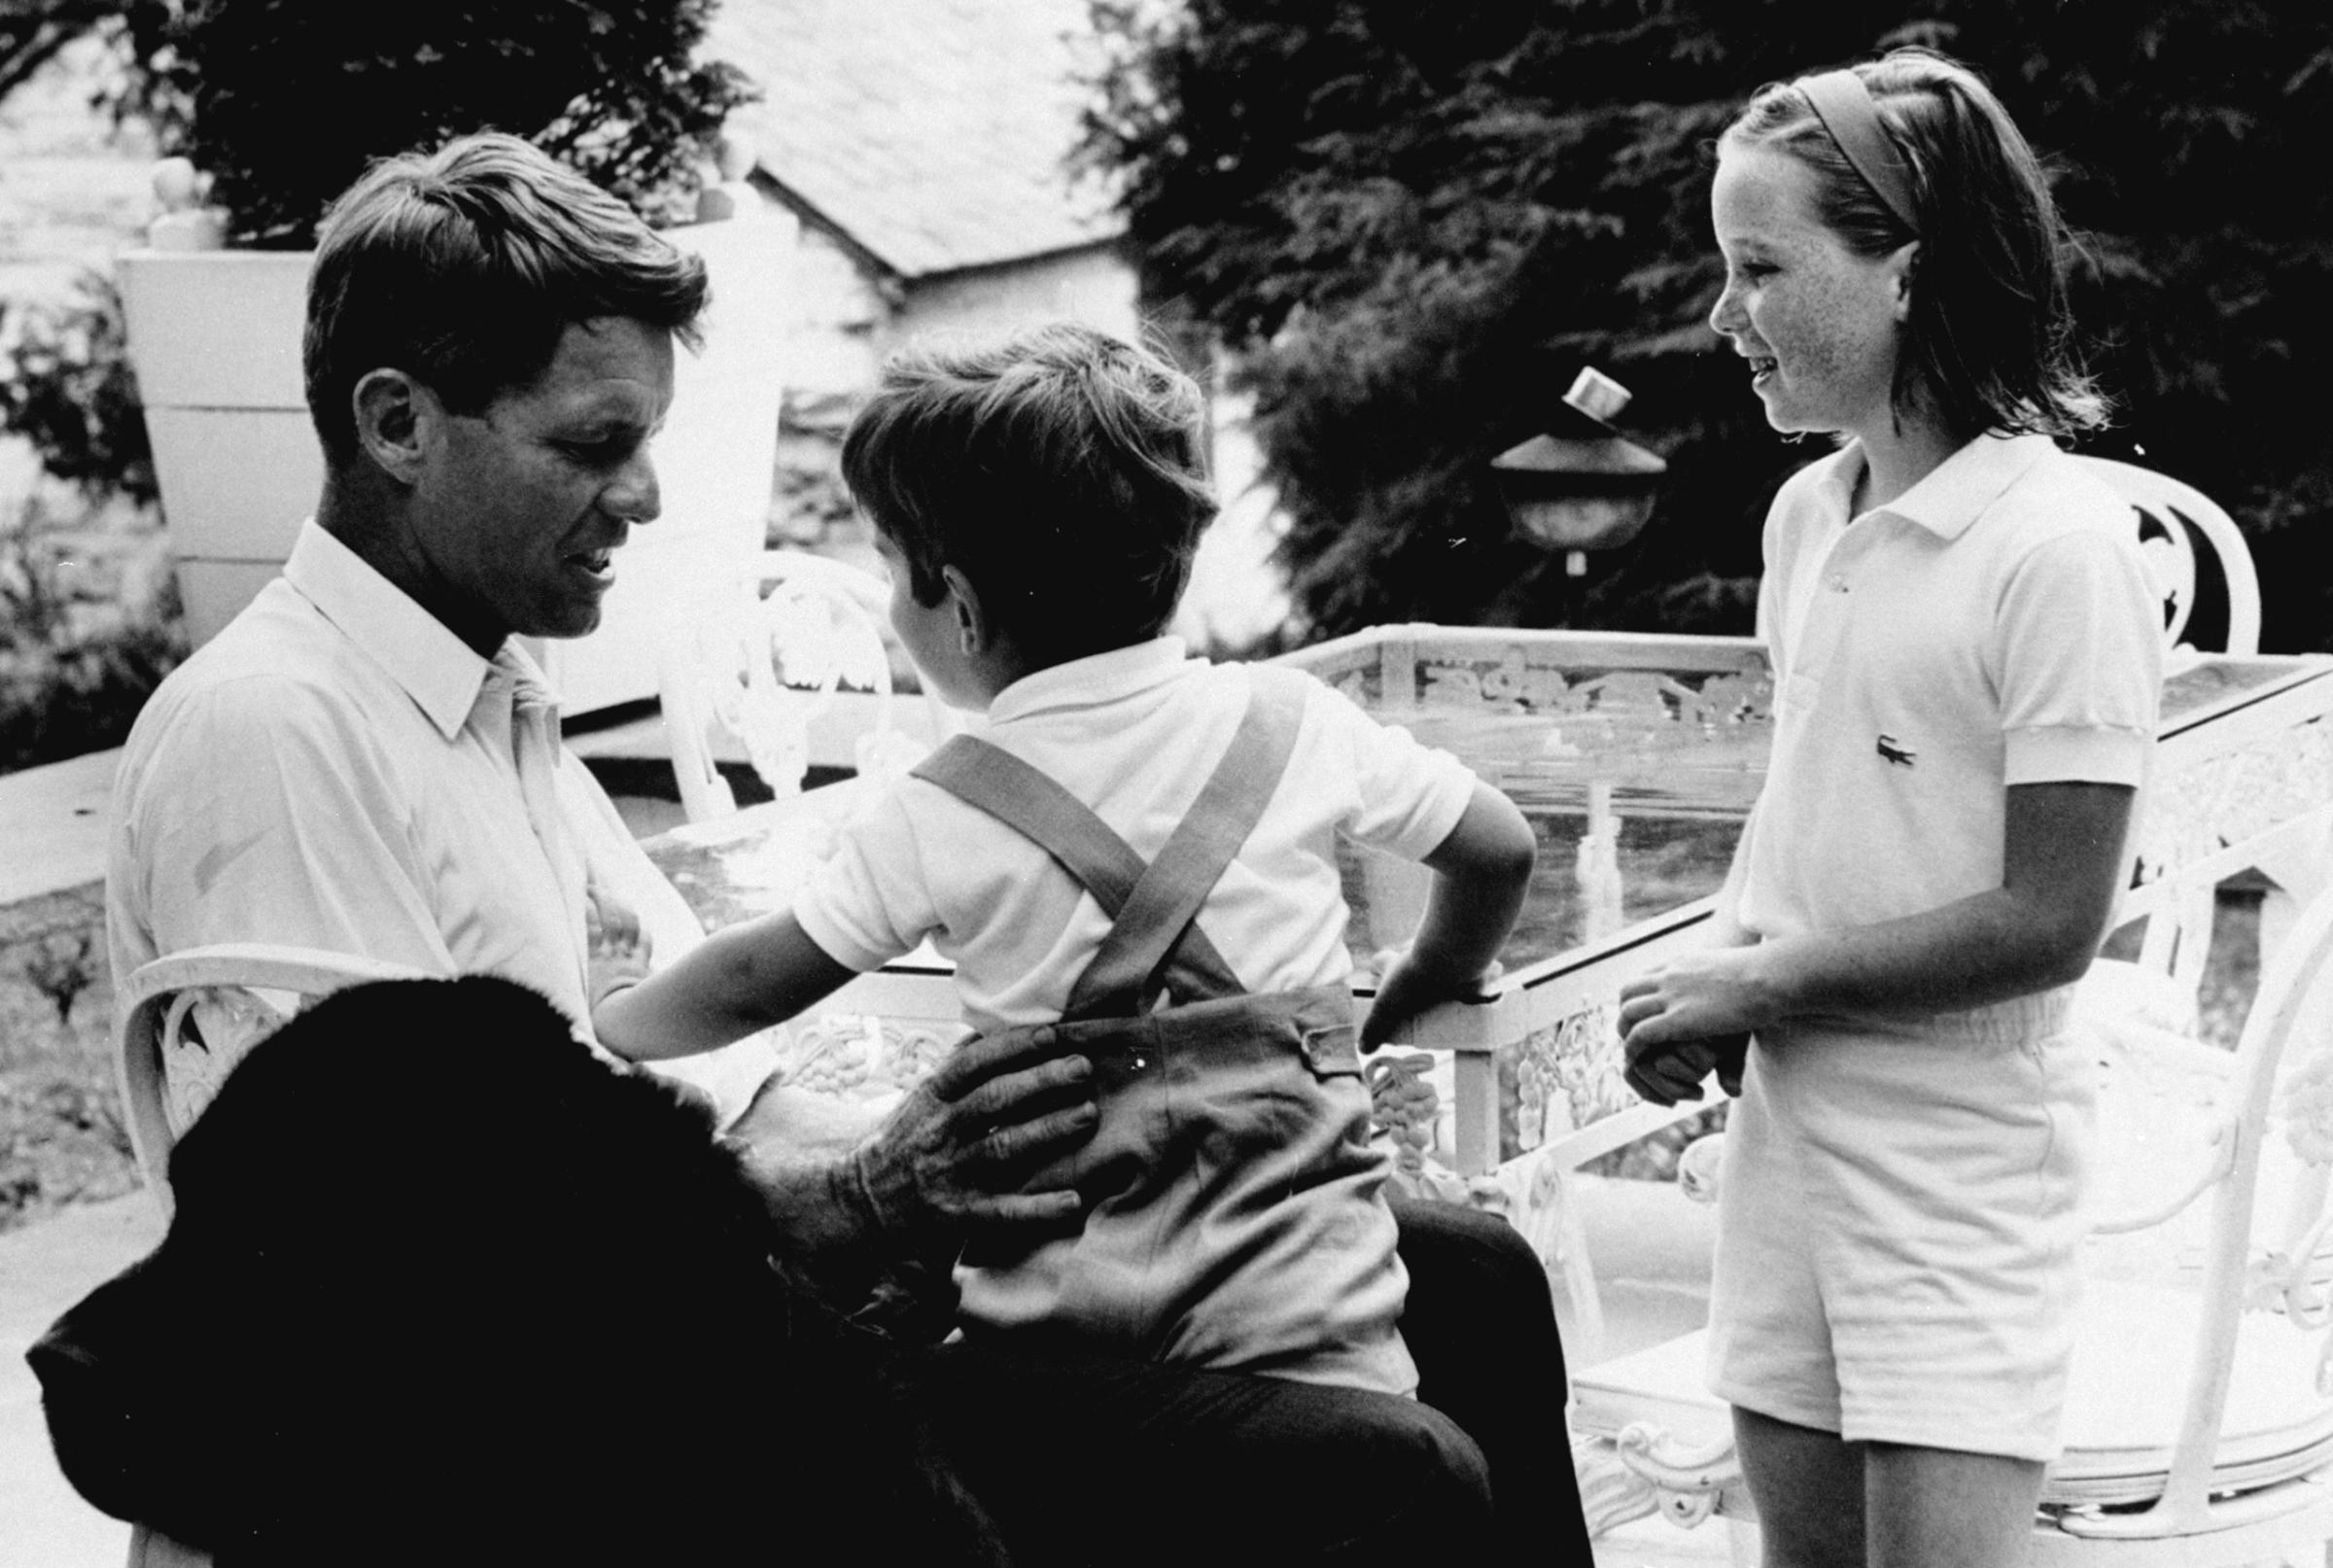 Robert Kennedy with John Kennedy Jr. and his daughter Courtney, 1964.